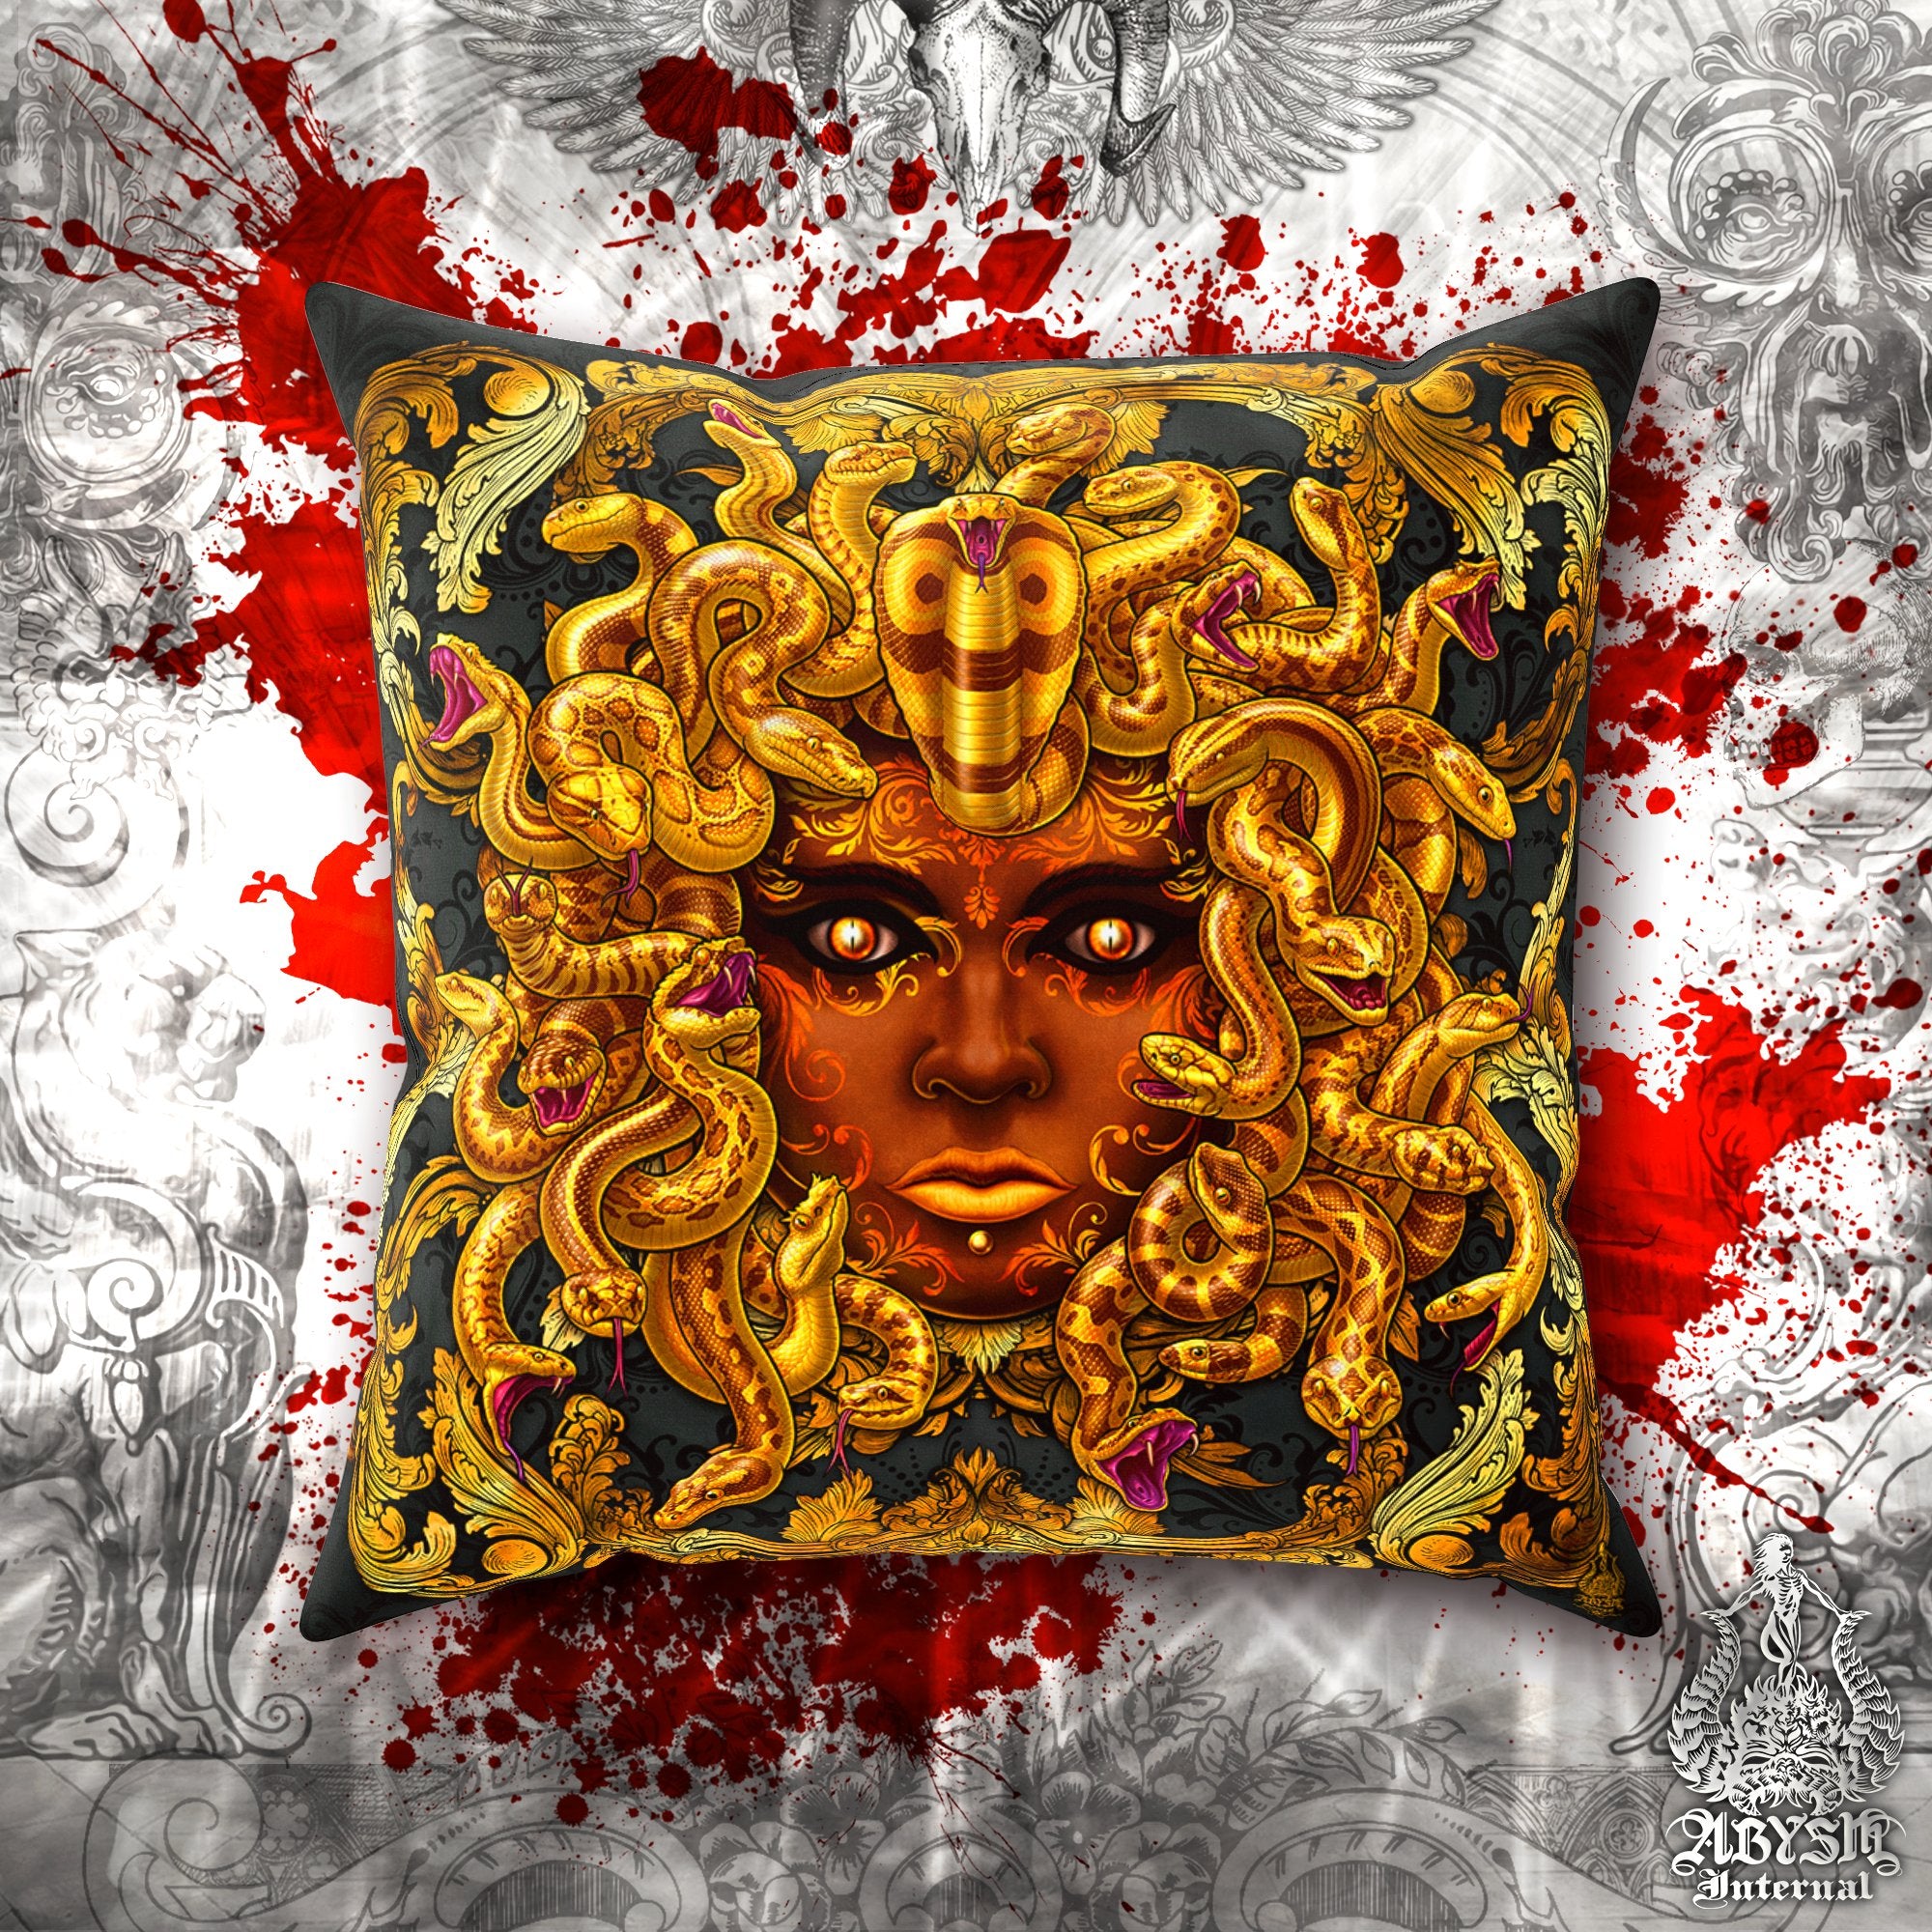 Skull Throw Pillow, Decorative Accent Pillow, Square Cushion Cover, Medusa, Game Room Decor, Macabre Art, Alternative Home - Gold Snakes, 2 Faces - Abysm Internal